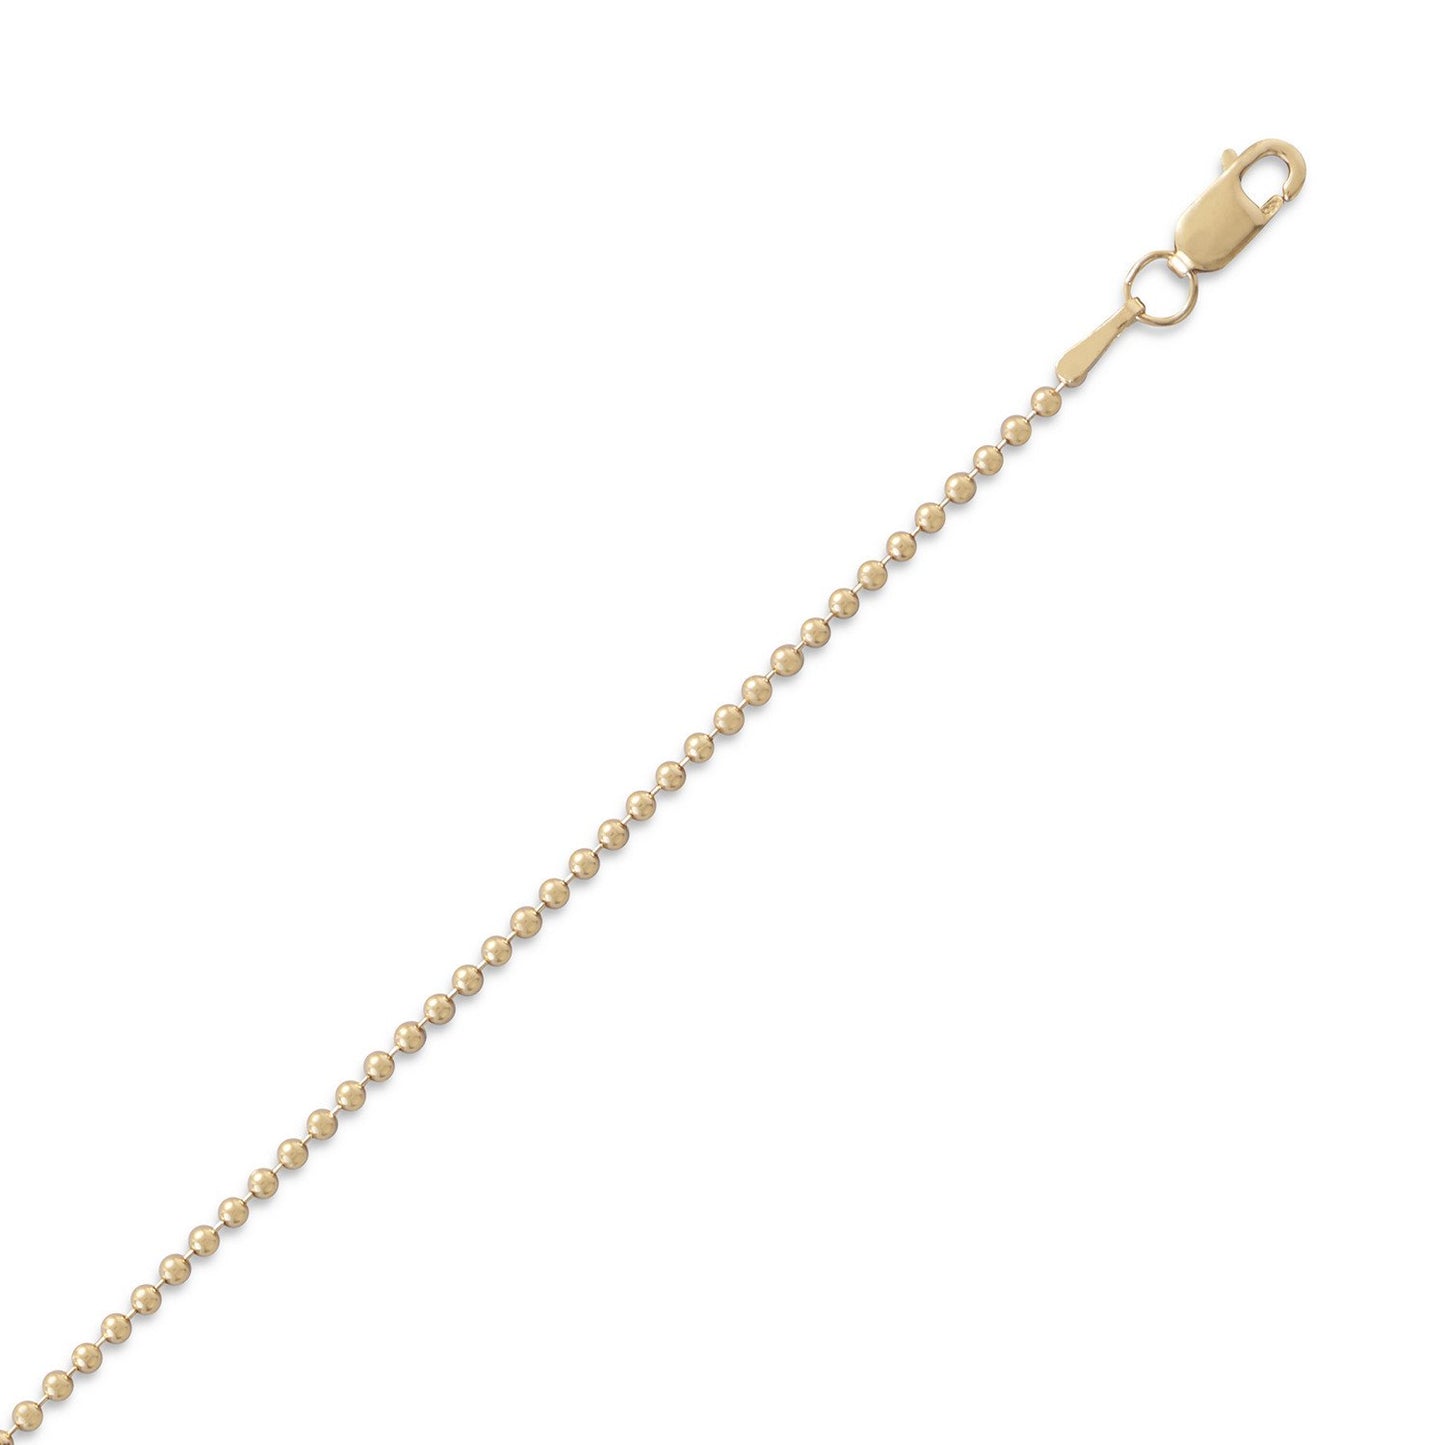 14/20 Gold Filled Bead Chain (1.5mm)